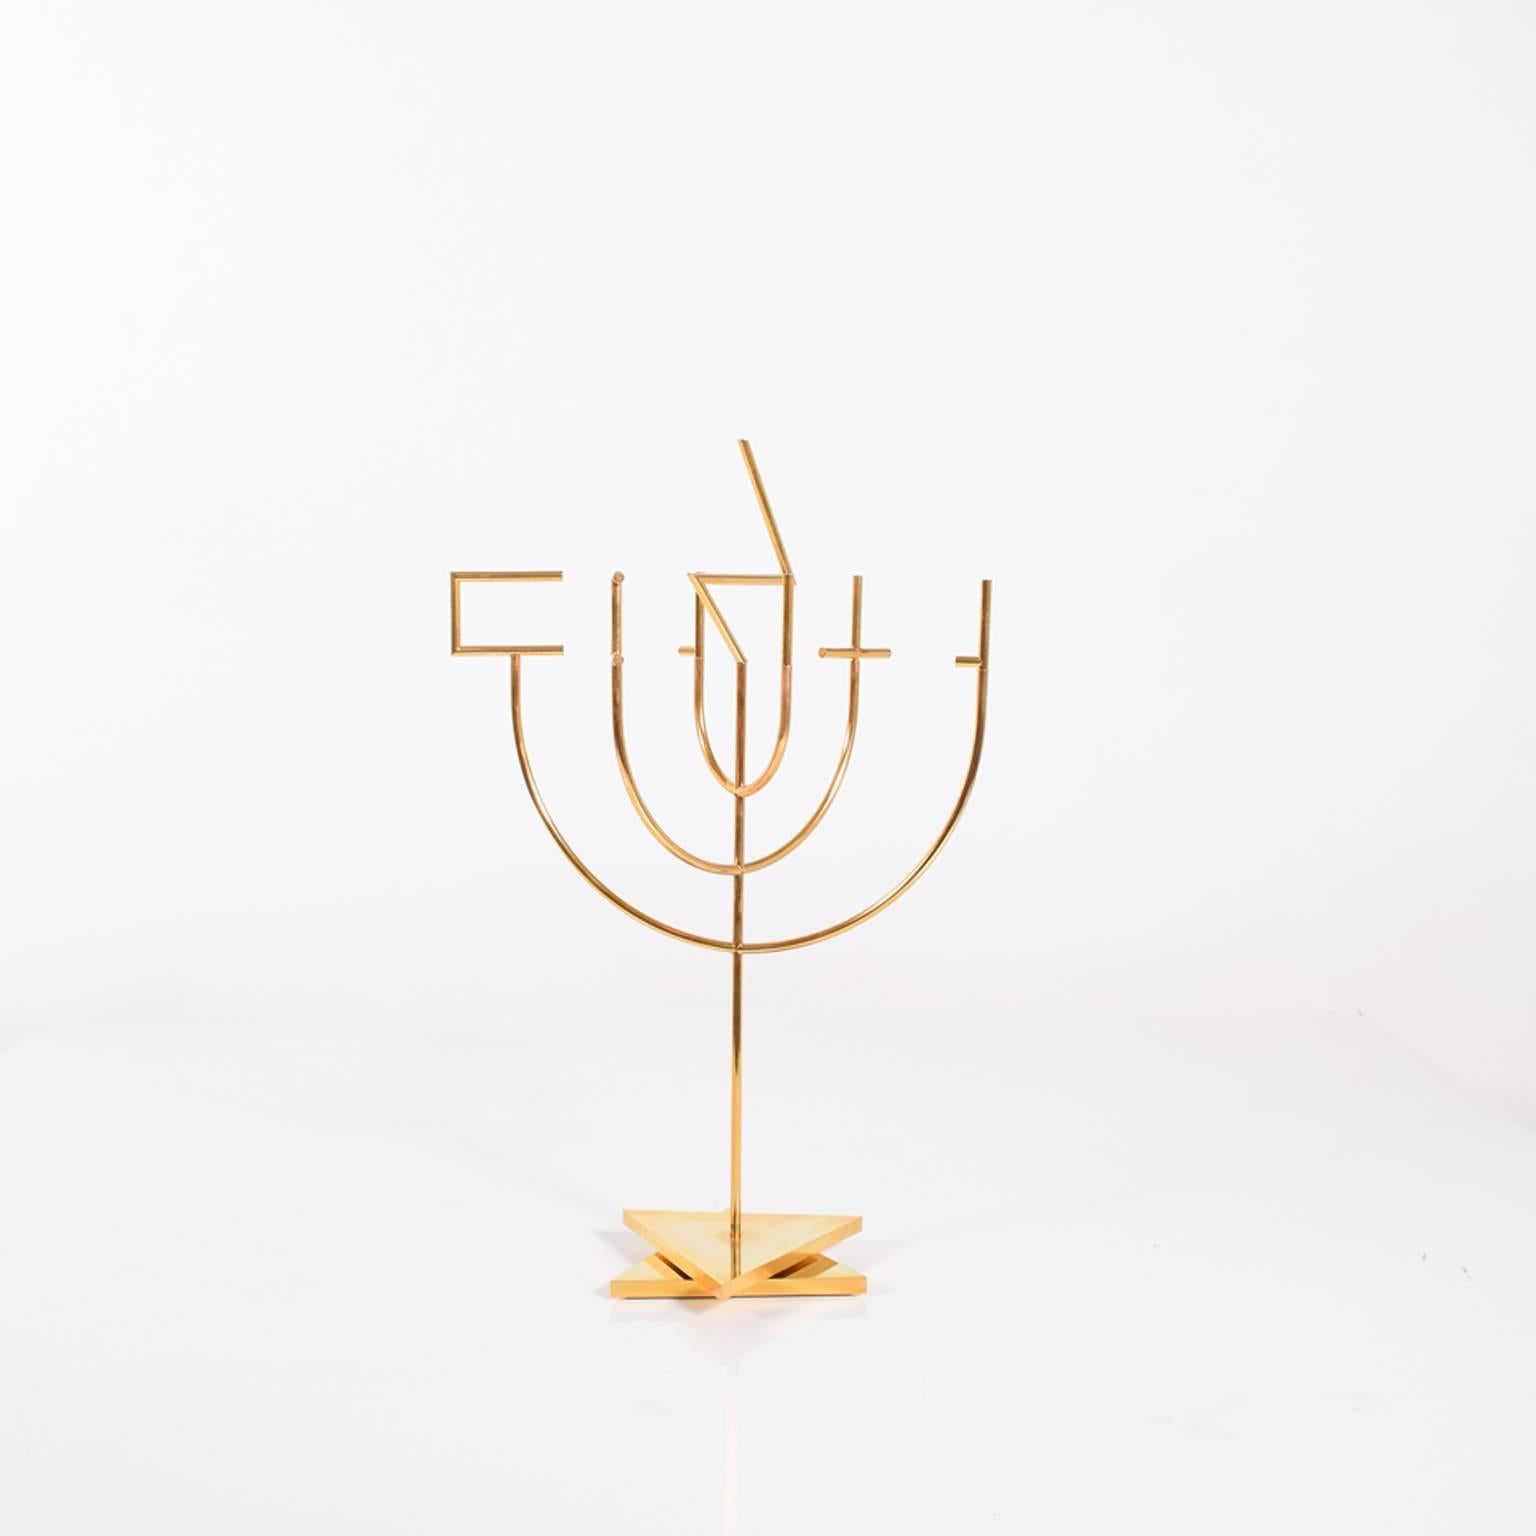 This Kinetic 'Shalom' Menorah was designed by Yacov Agam in 1980. Signed and numbered 126 of 180. Gold-plated brass.